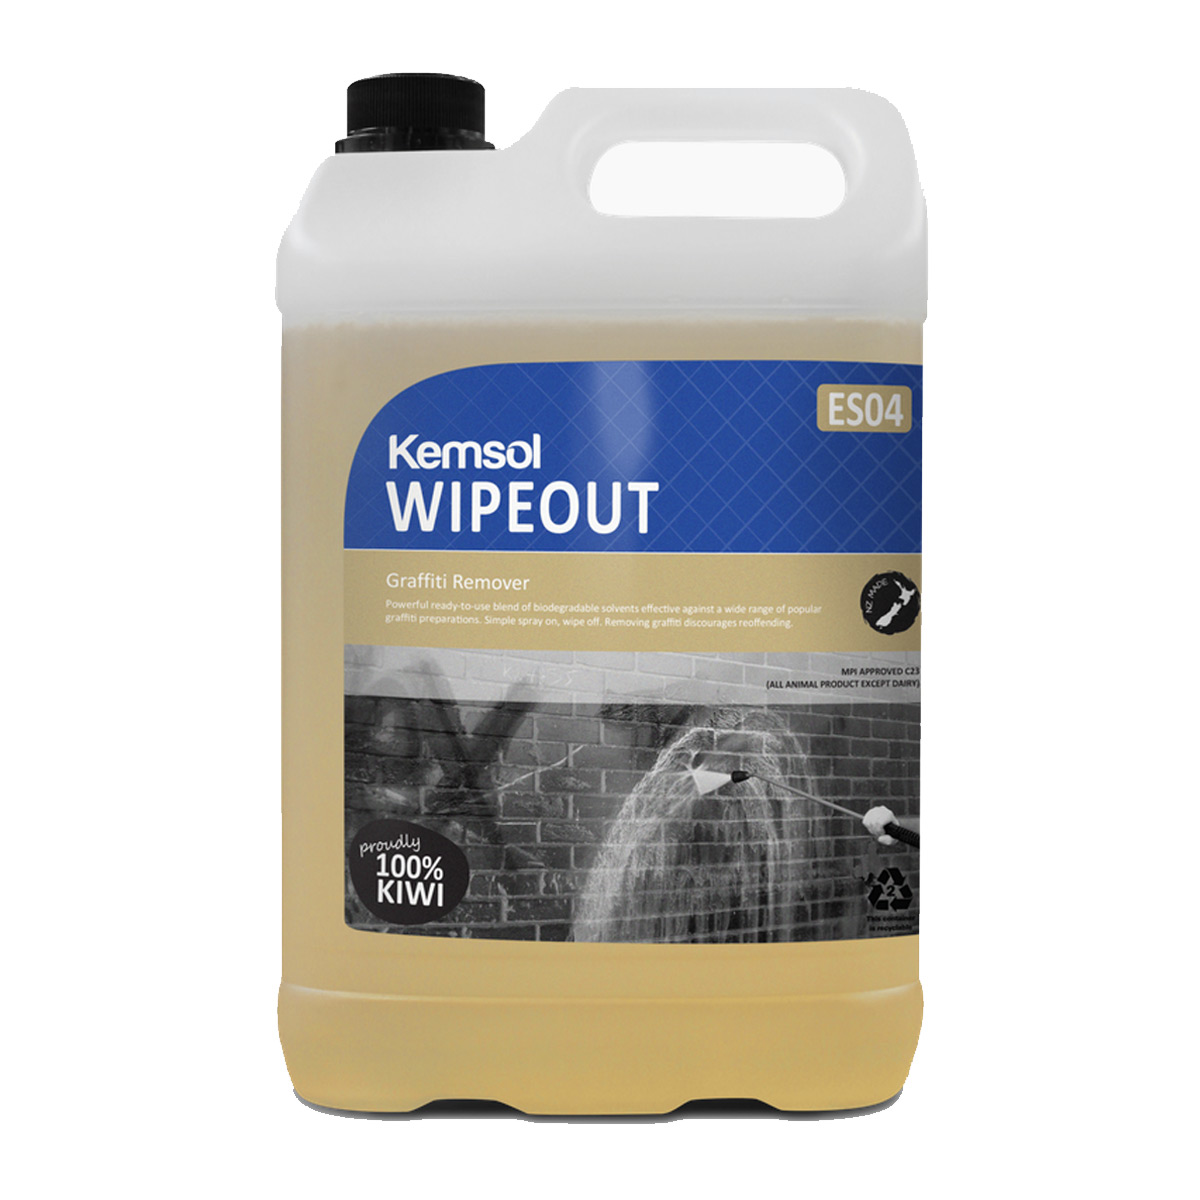 cleaning-products-industrial-specialist-wipeout-graffiti-remover-5L-litre-biodegradable-solvents-powerful-spray-on-wipe-off-vjs-distributors-hawkes-bay-nz-KWIPE